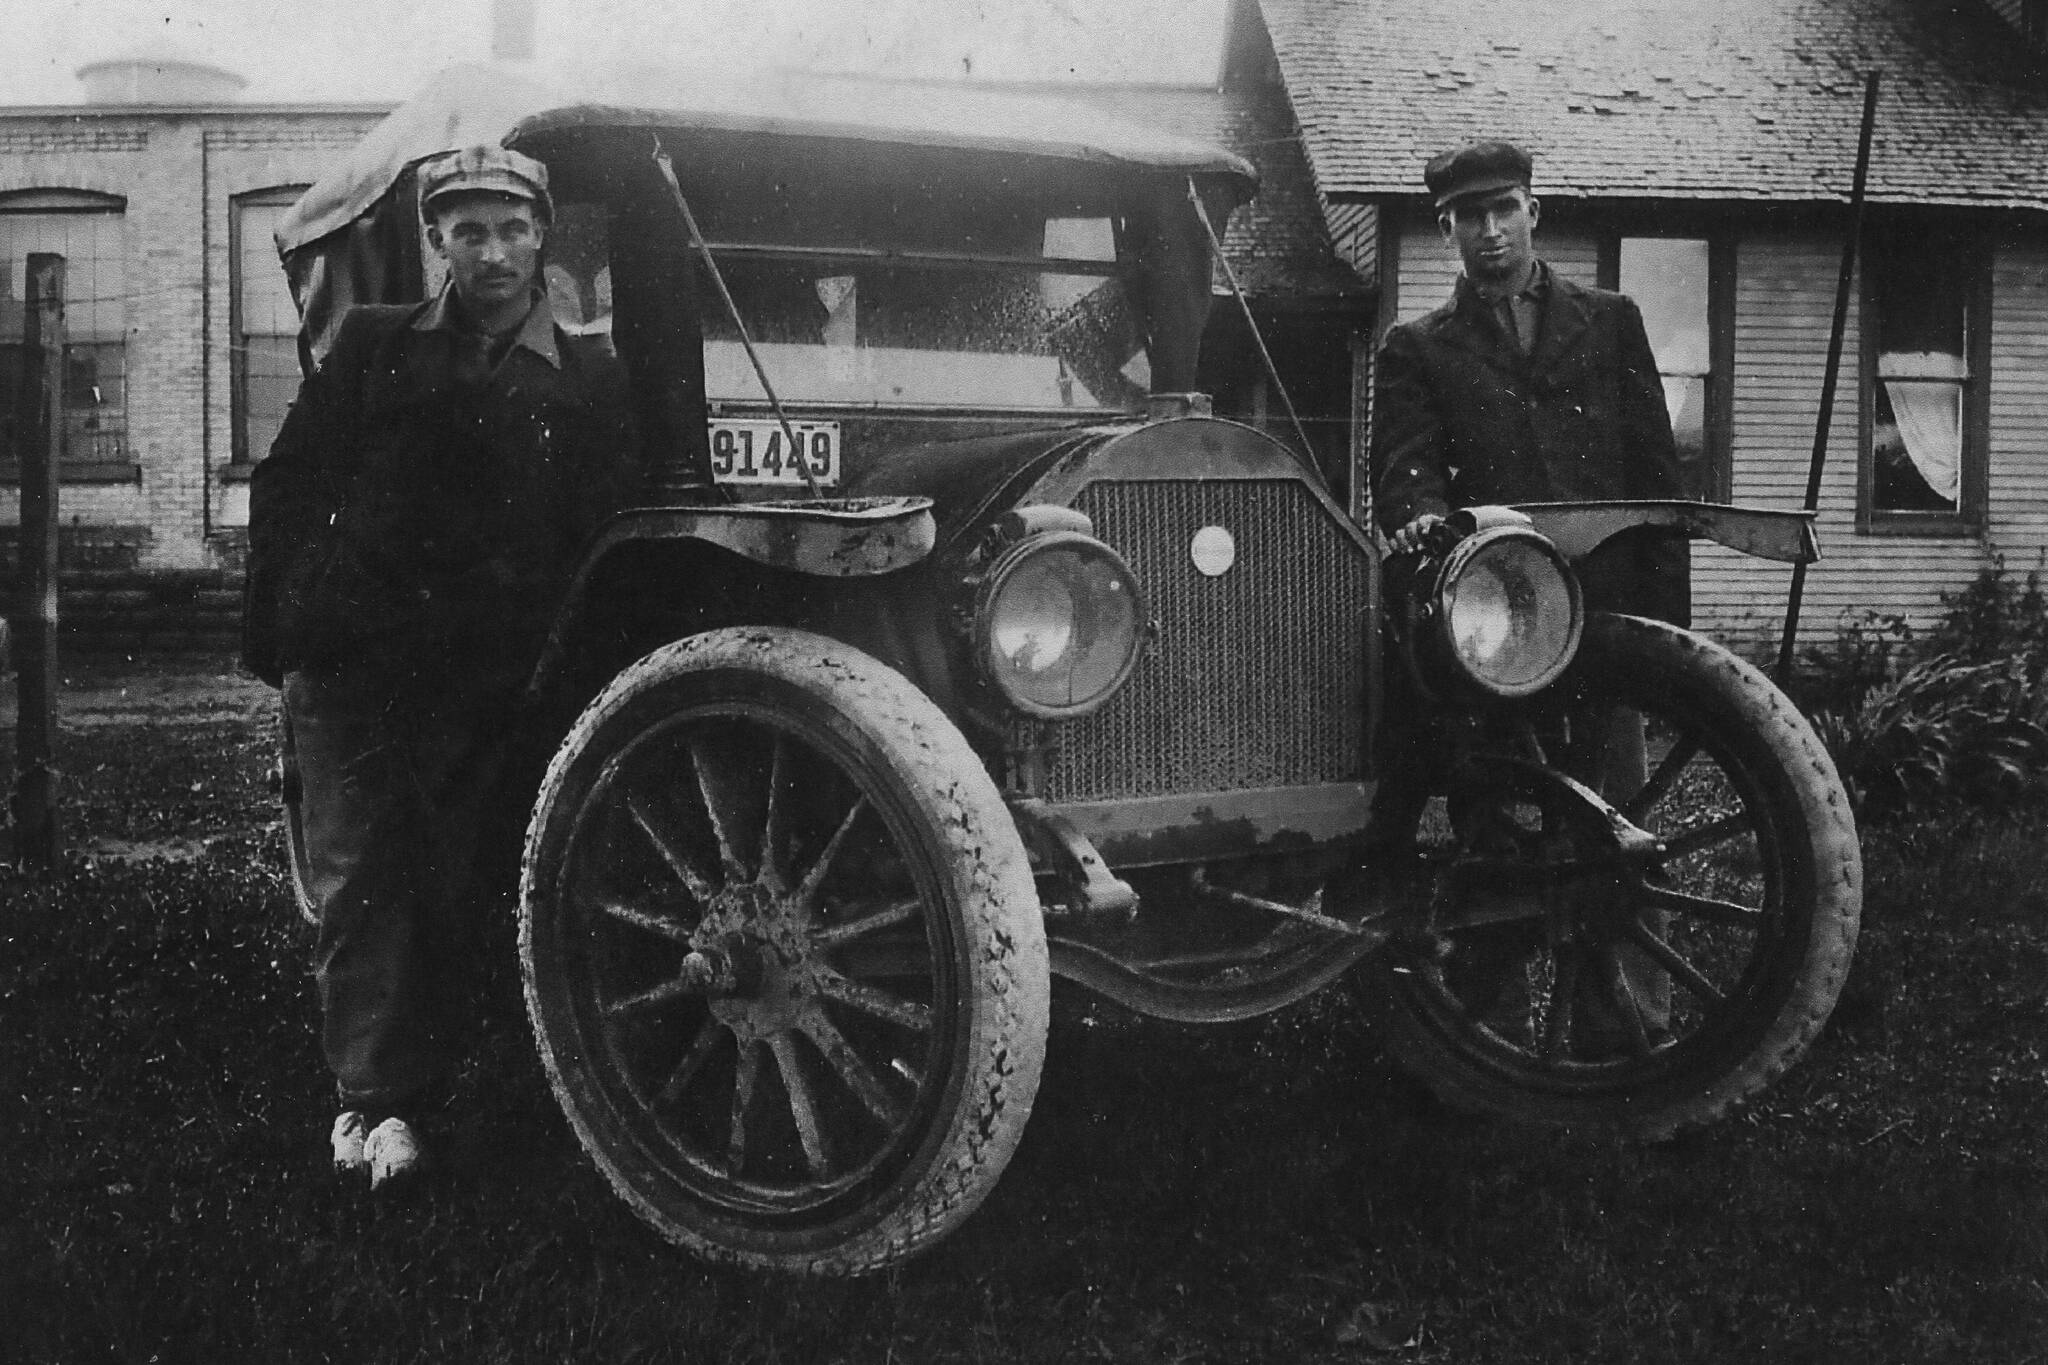 Brothers James (left) and Lawrence Keeler with their Kissel car, circa 1910s. Both brothers enlisted in the U.S. Army to fight in World War I. James was killed in battle. Photo courtesy of the Keeler Family Collection.